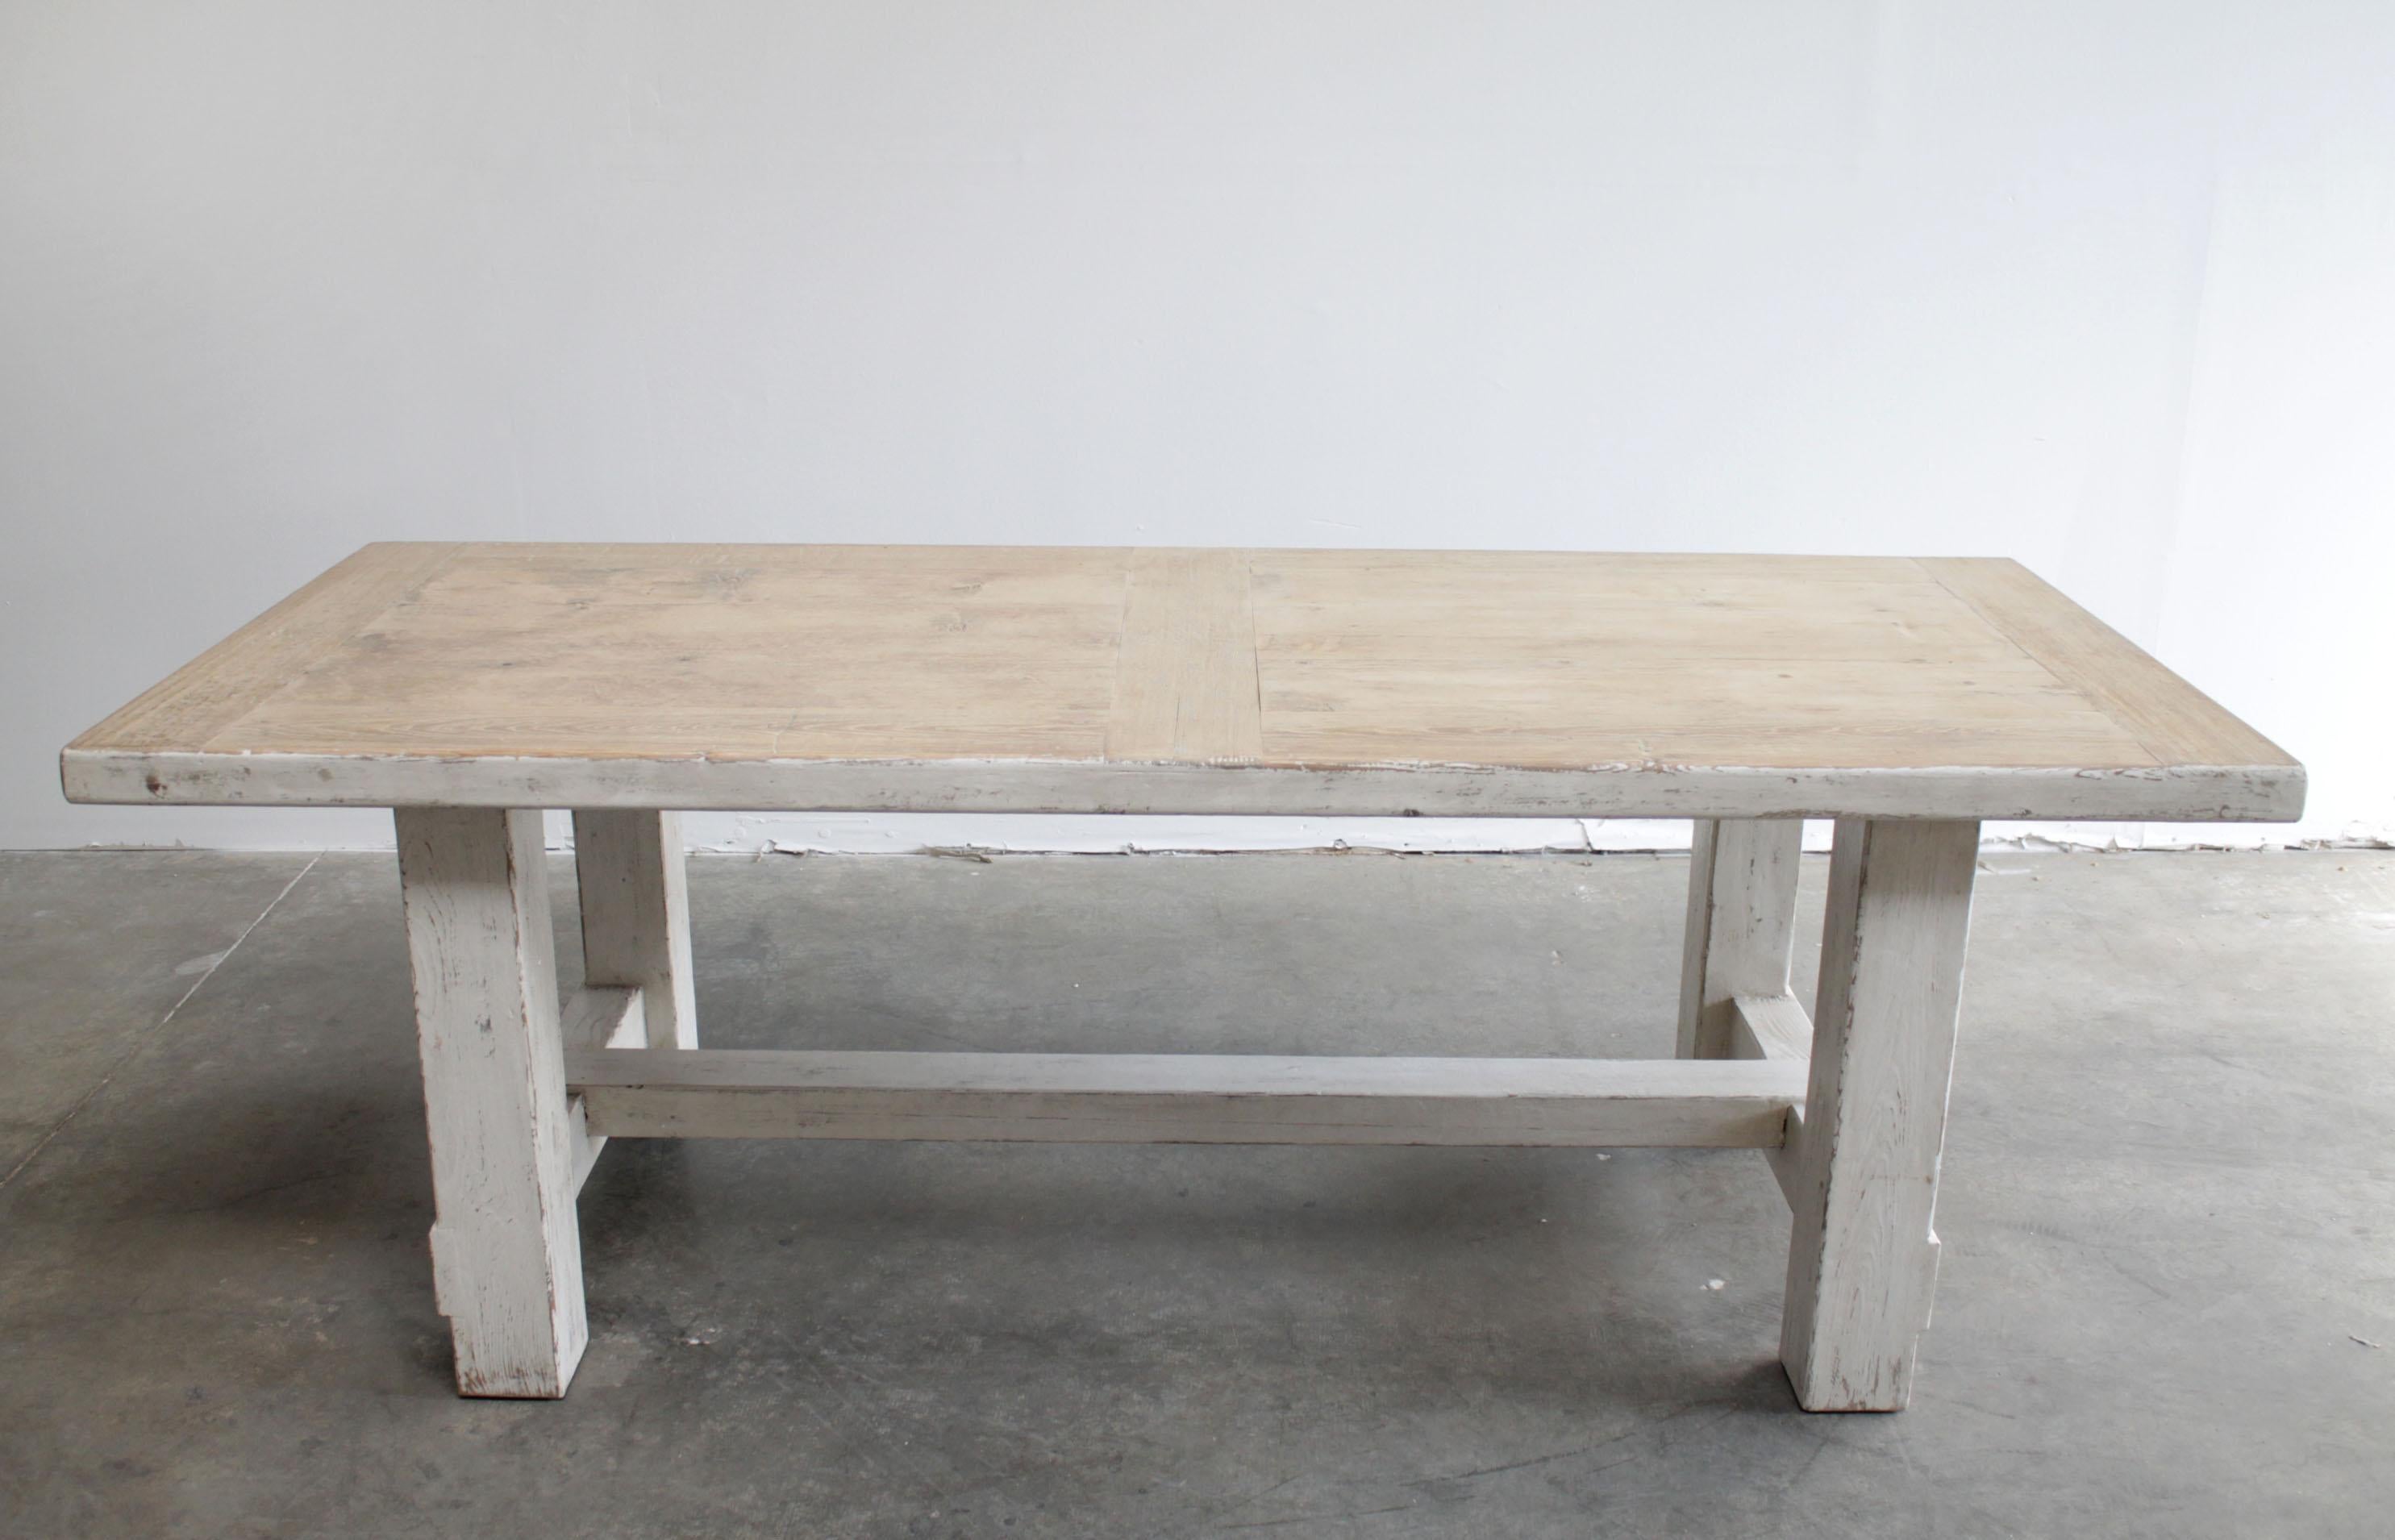 Reclaimed pine wood Farm House style dining table with distressed white paint
Legs and apron are finished in an antique white washed distressed paint, with a natural distressed pine top.
Measures: 35.5